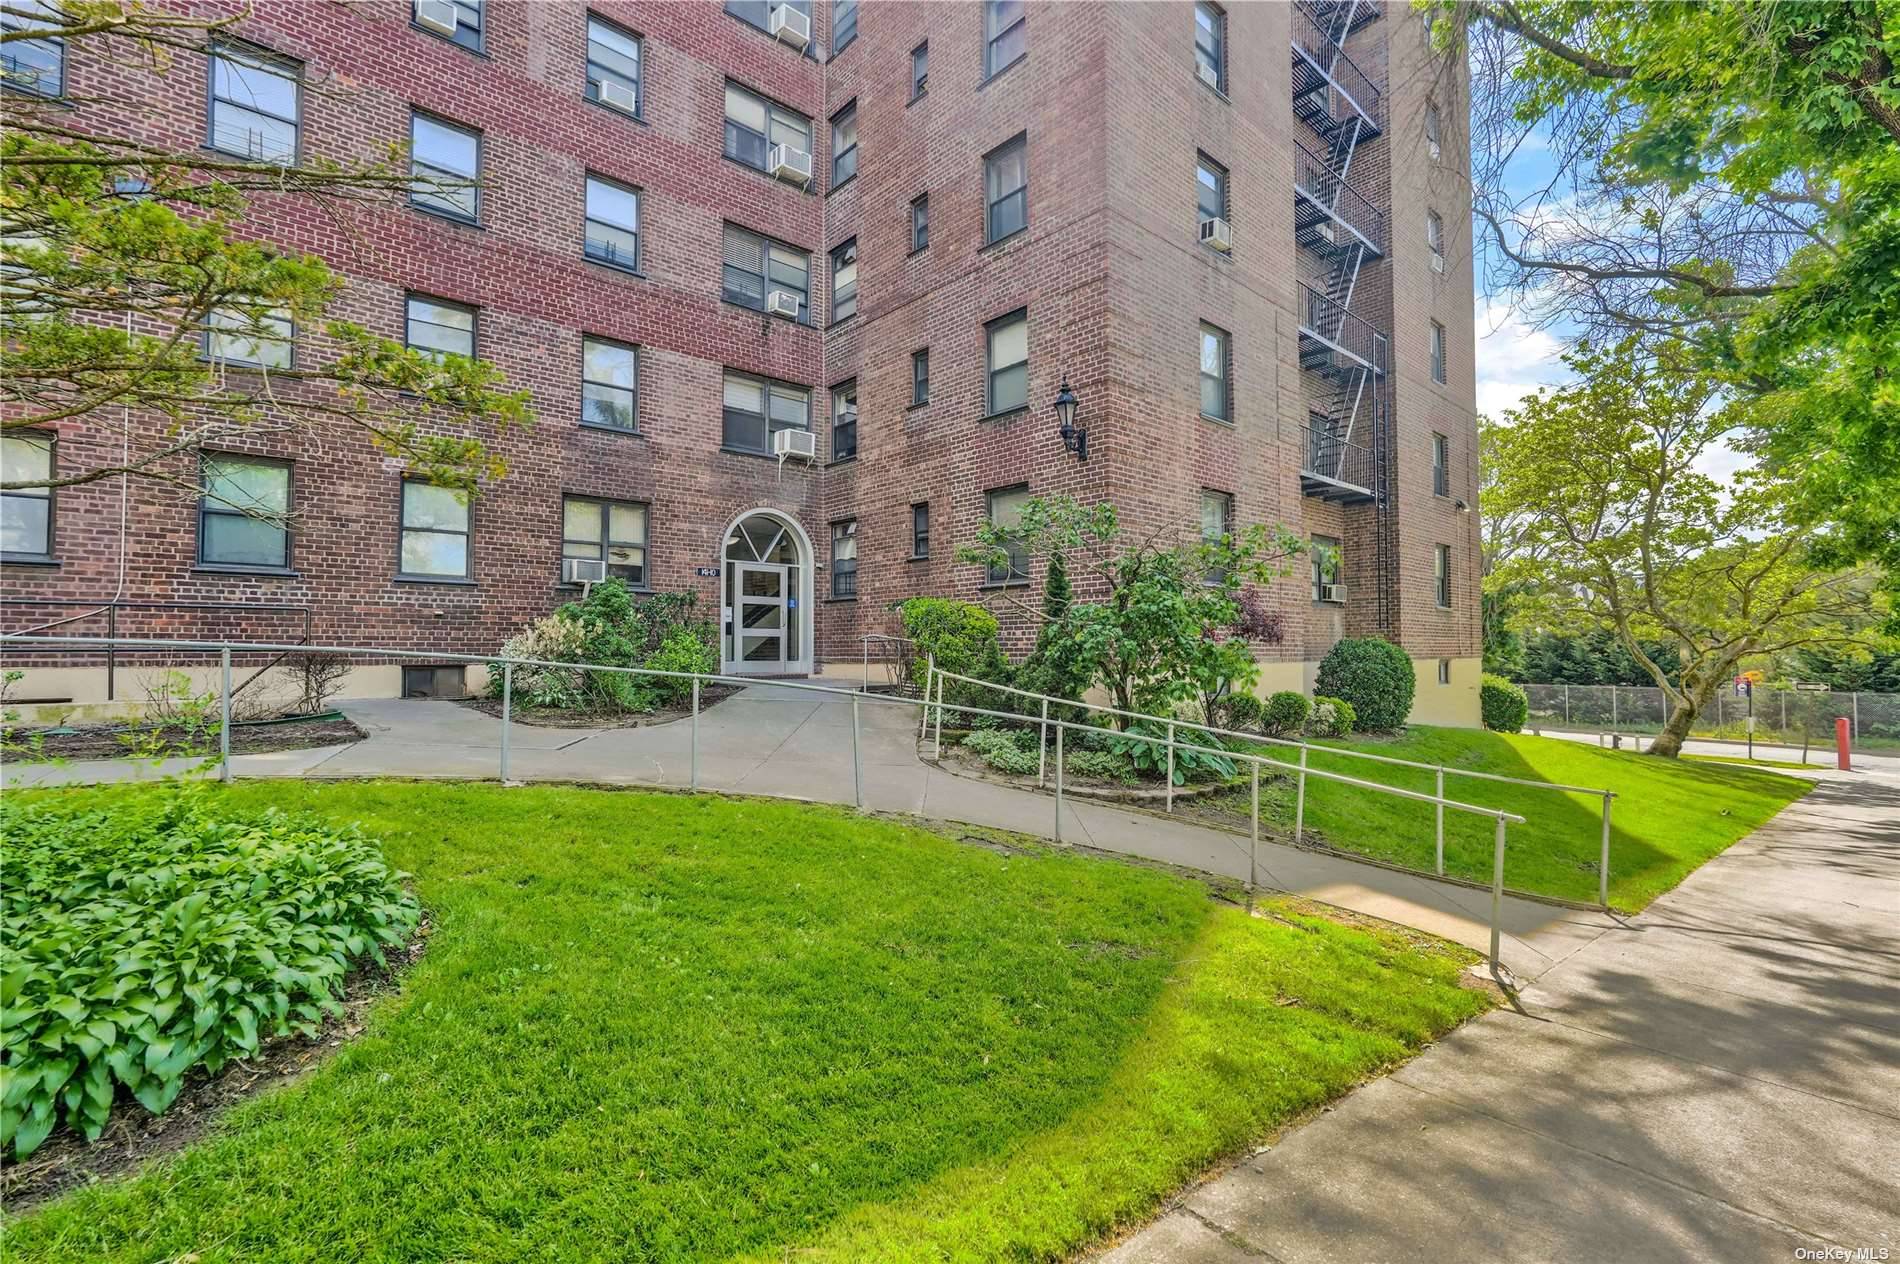 Welcome to this spacious and beautifully renovated three bedroom, one bathroom cooperative apartment located on the fourth floor in North Flushing.